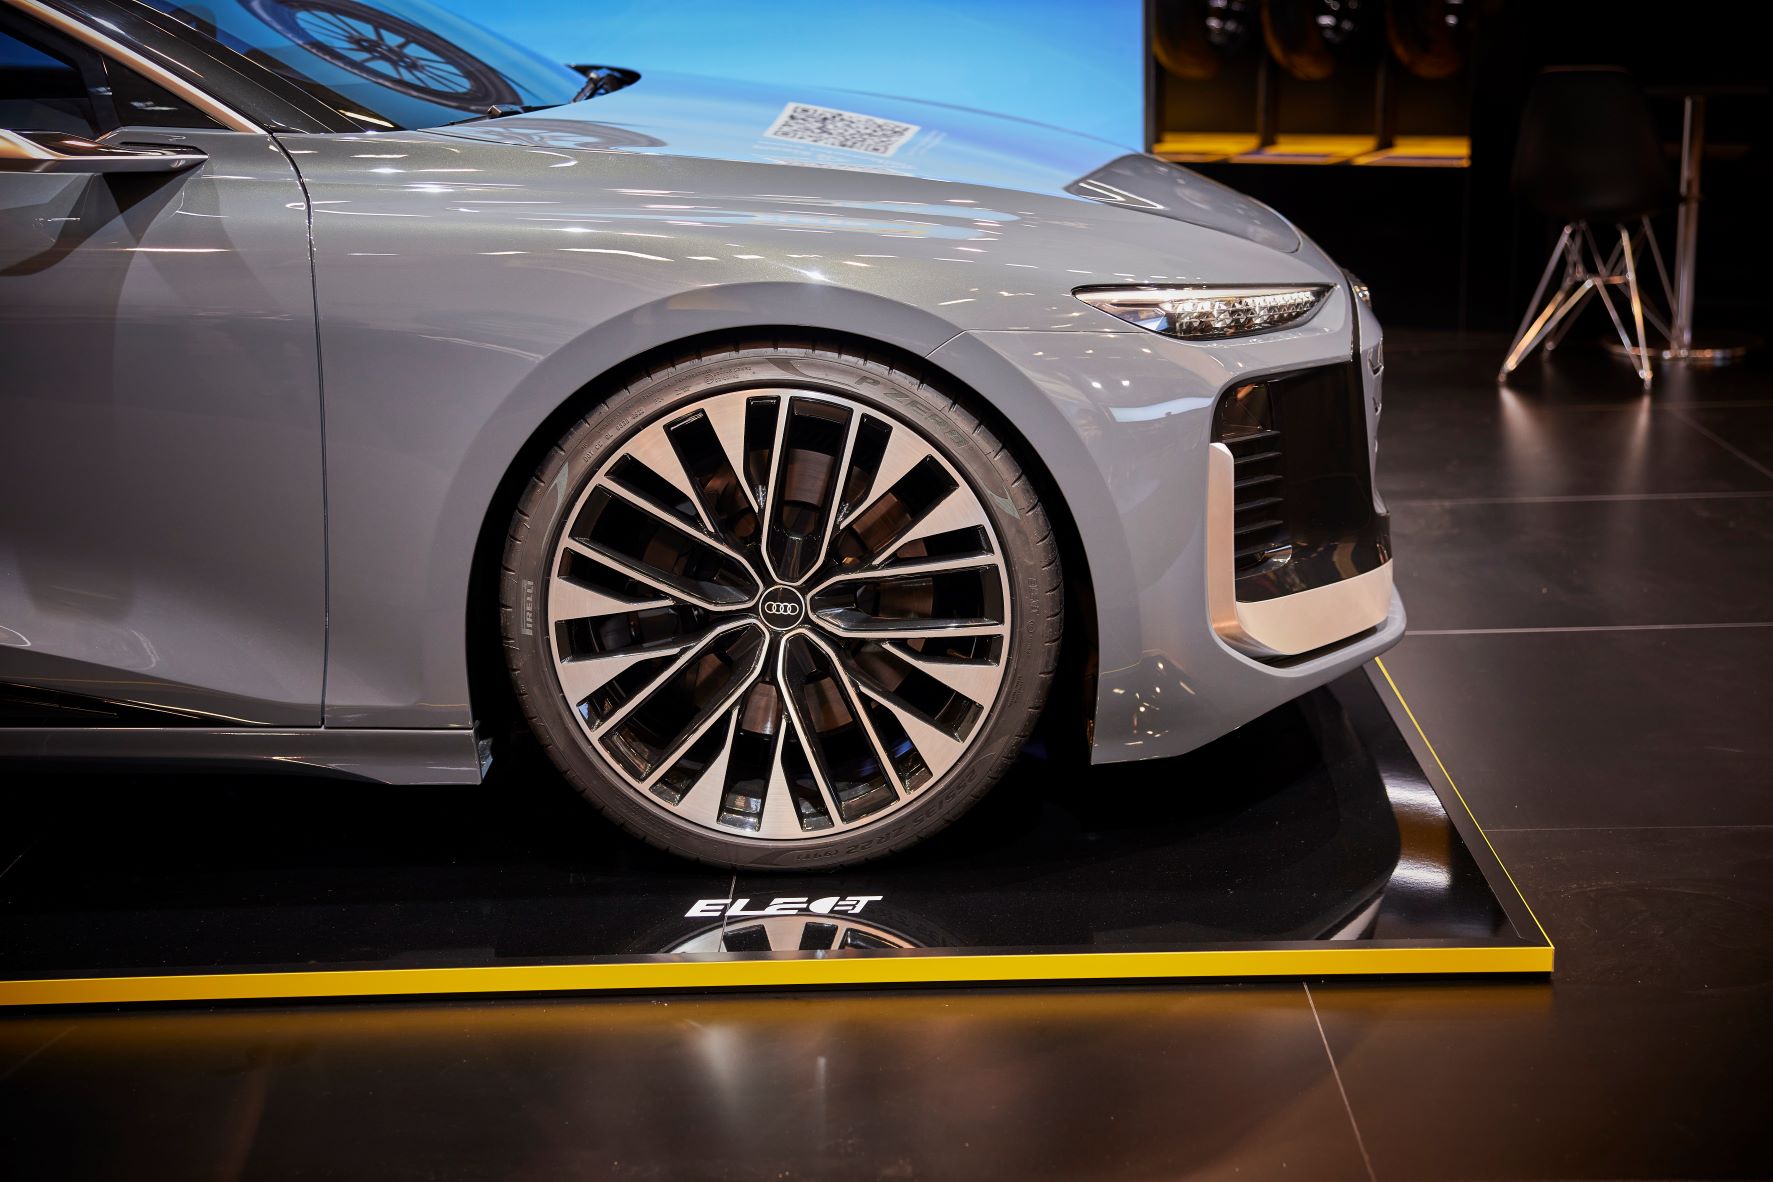 Pirelli emphasises sustainable mobility technologies at The Tire Cologne